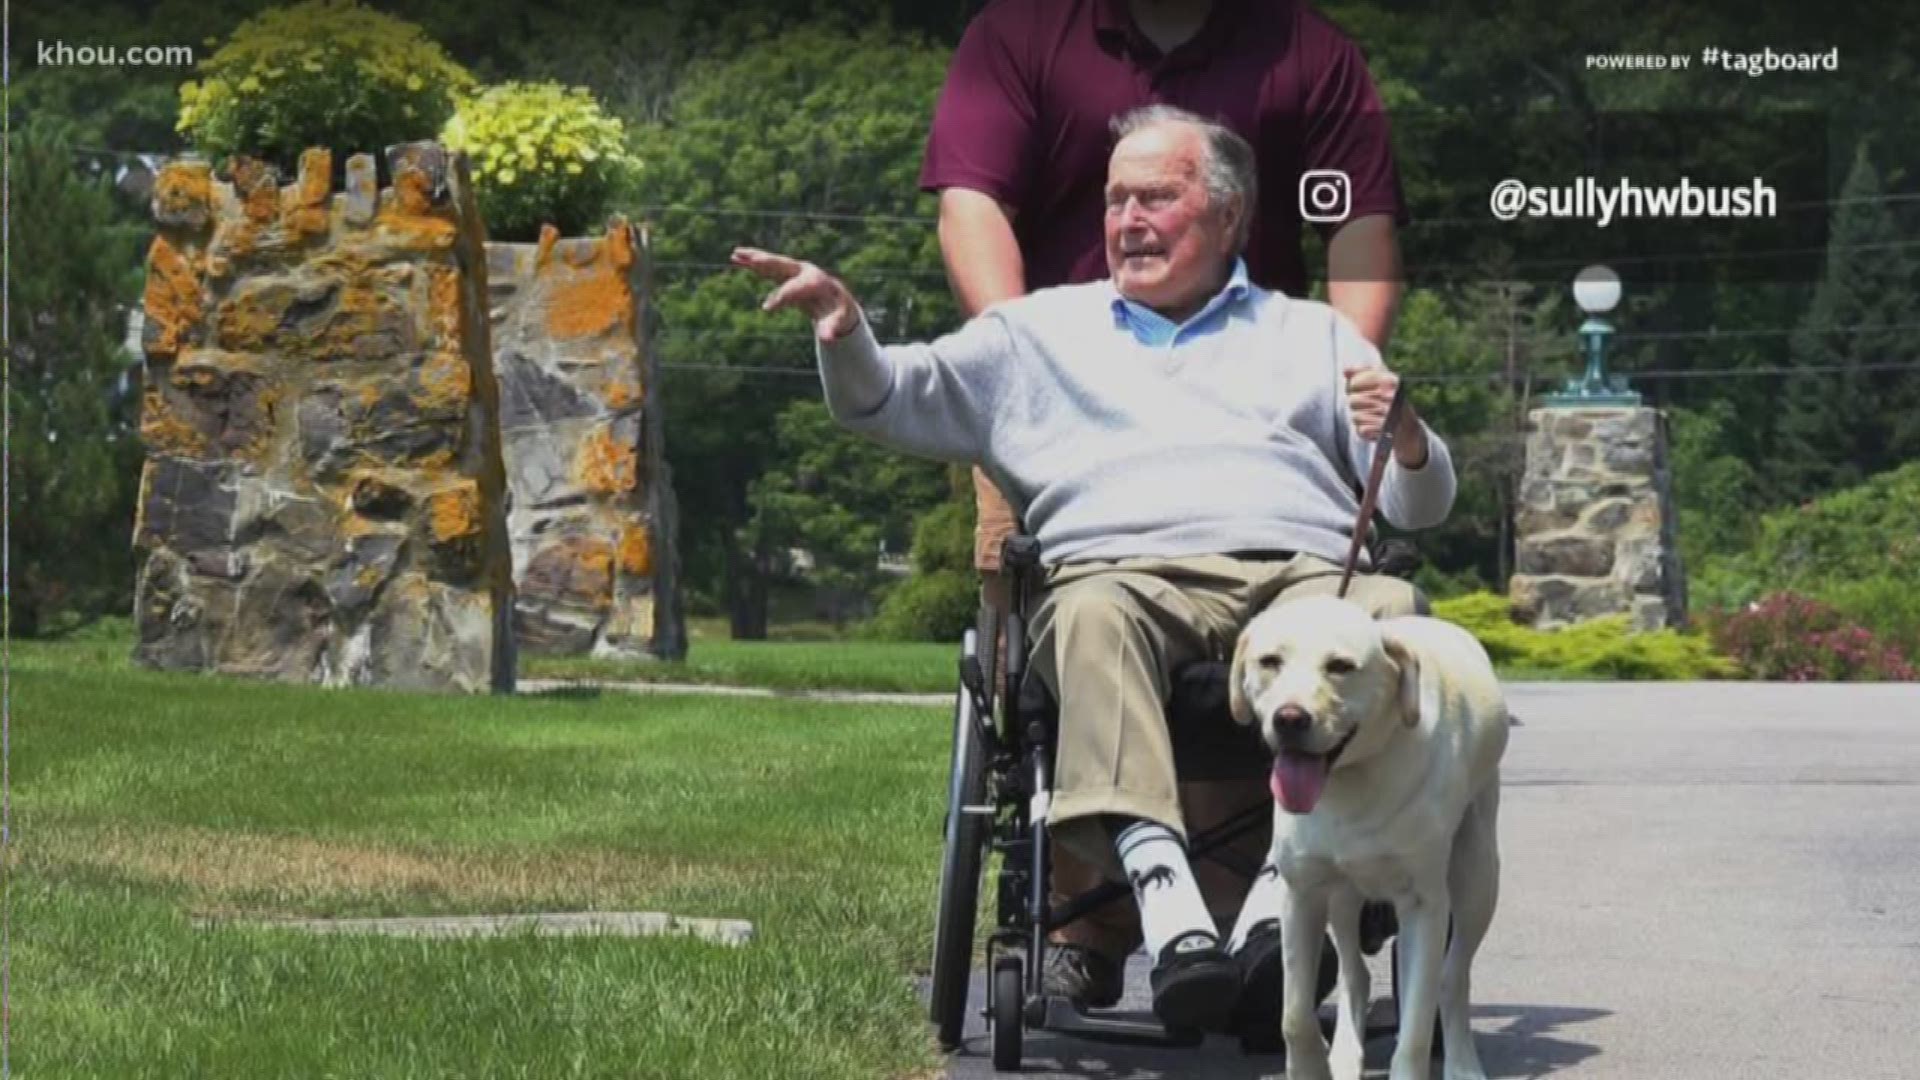 Former President George H.W. Bush's service dog, Sully, is preparing for a new role. At the end of the month, the 2-year-old Labrador will start working with veterans at Walter Reed National Military Medical Center in Maryland.